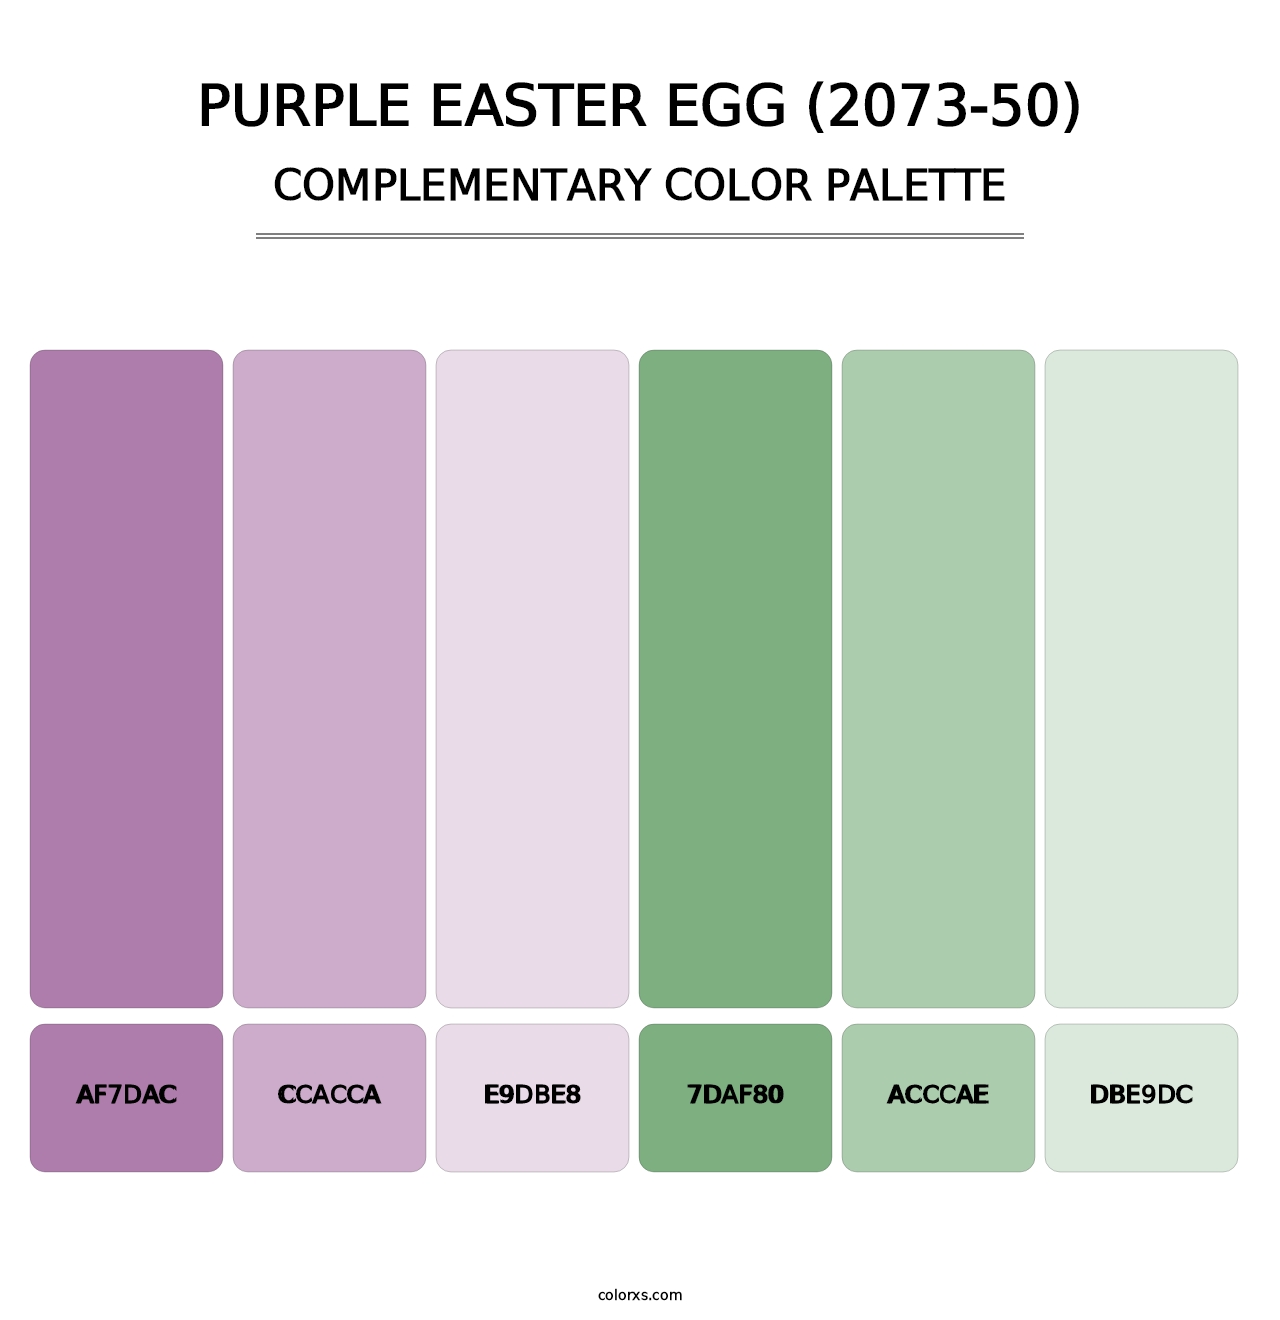 Purple Easter Egg (2073-50) - Complementary Color Palette